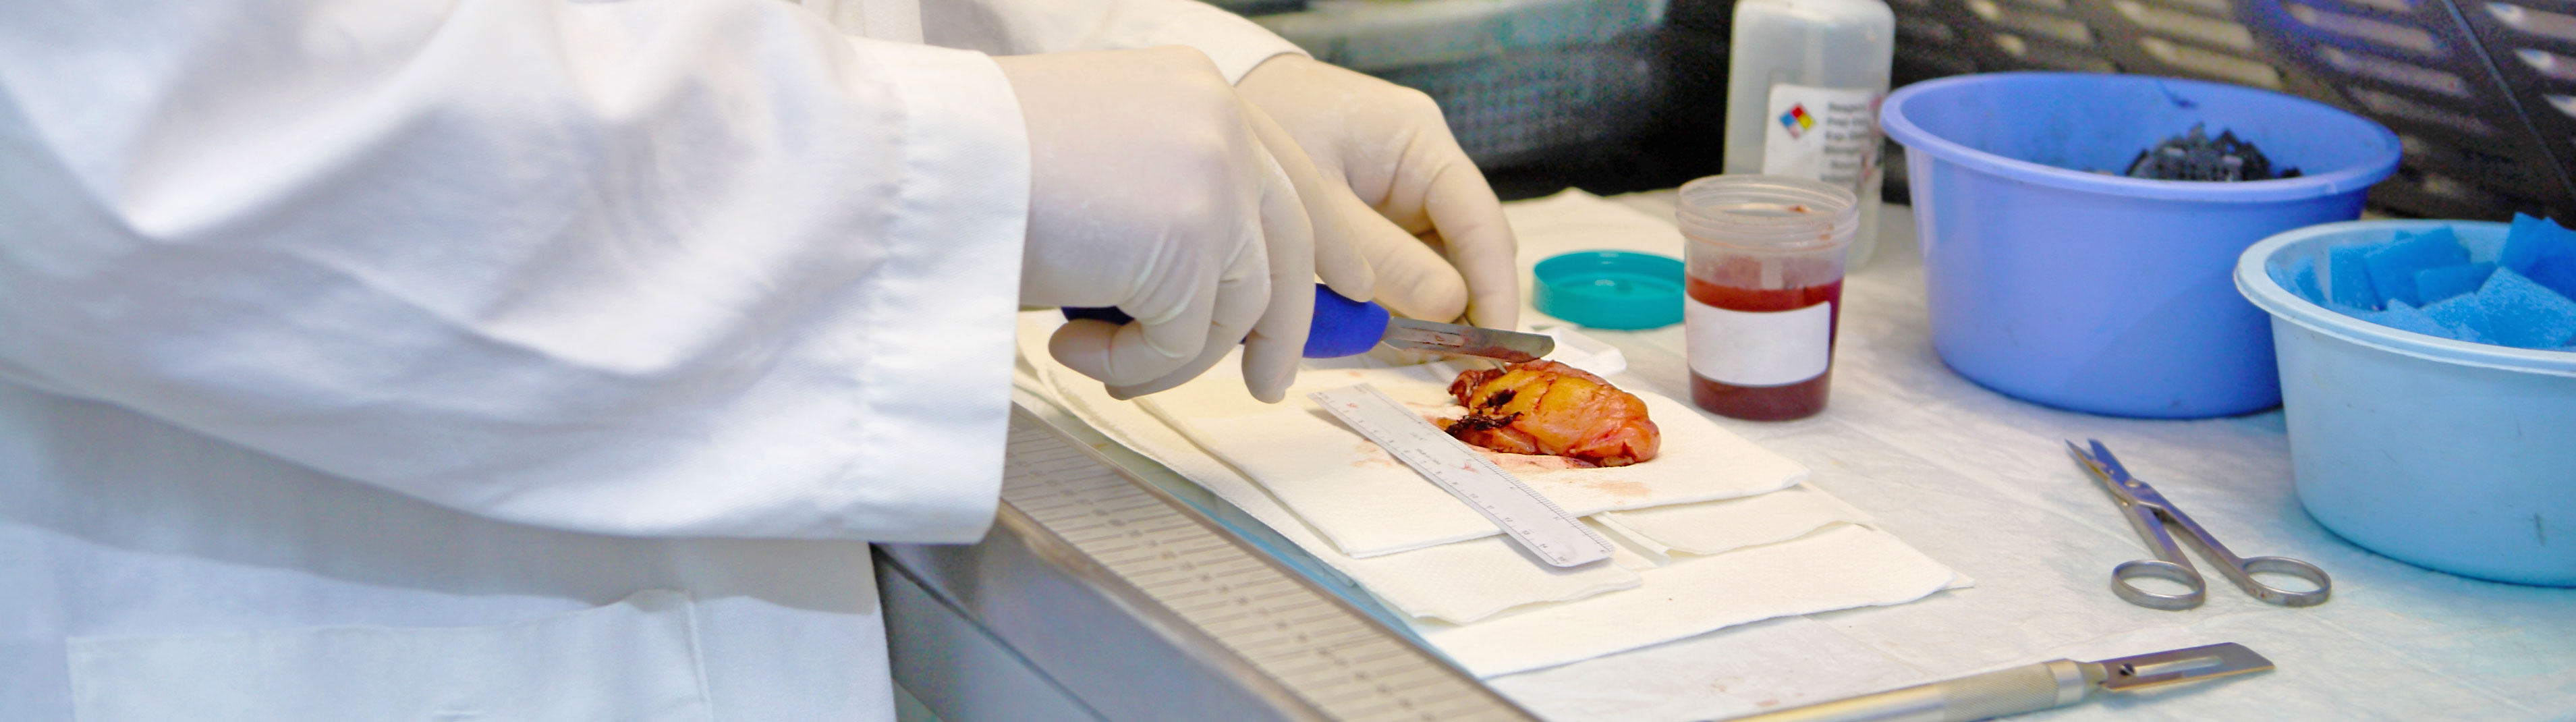 Scientist is using a scalpel to slice open an organ.